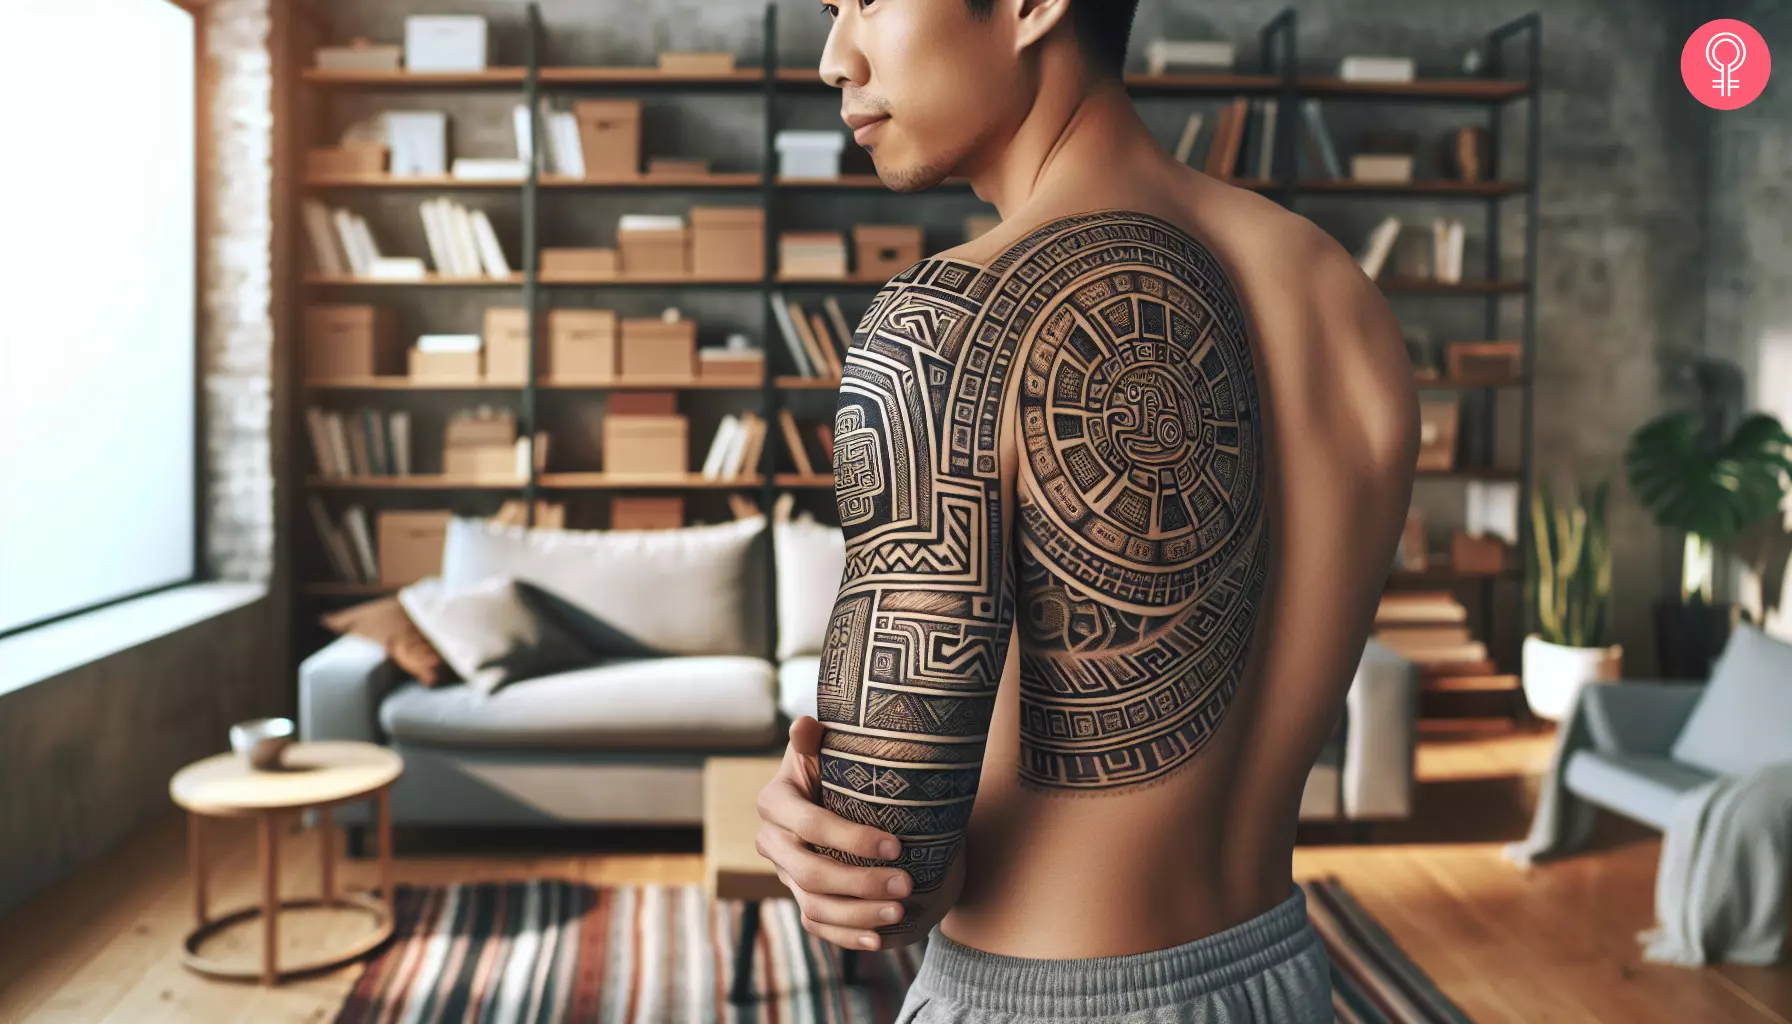 An intricate geometric Mayan tattoo design on a man’s upper back and arm